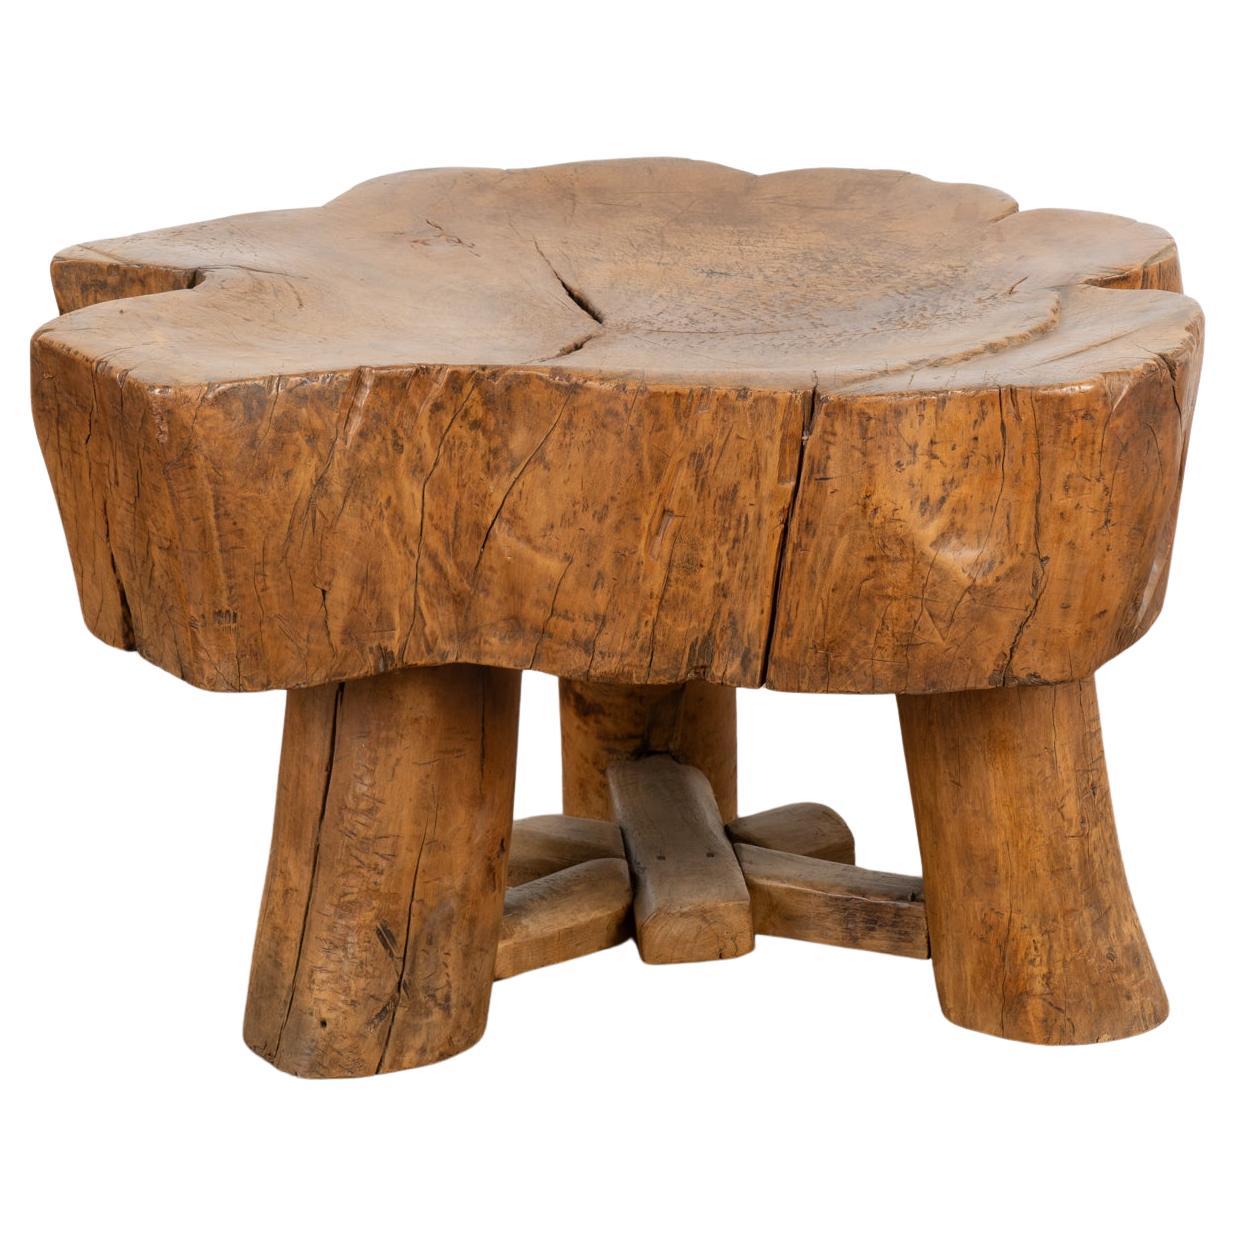 Rustic Slab Wood Round Coffee Table, China circa 1890 For Sale